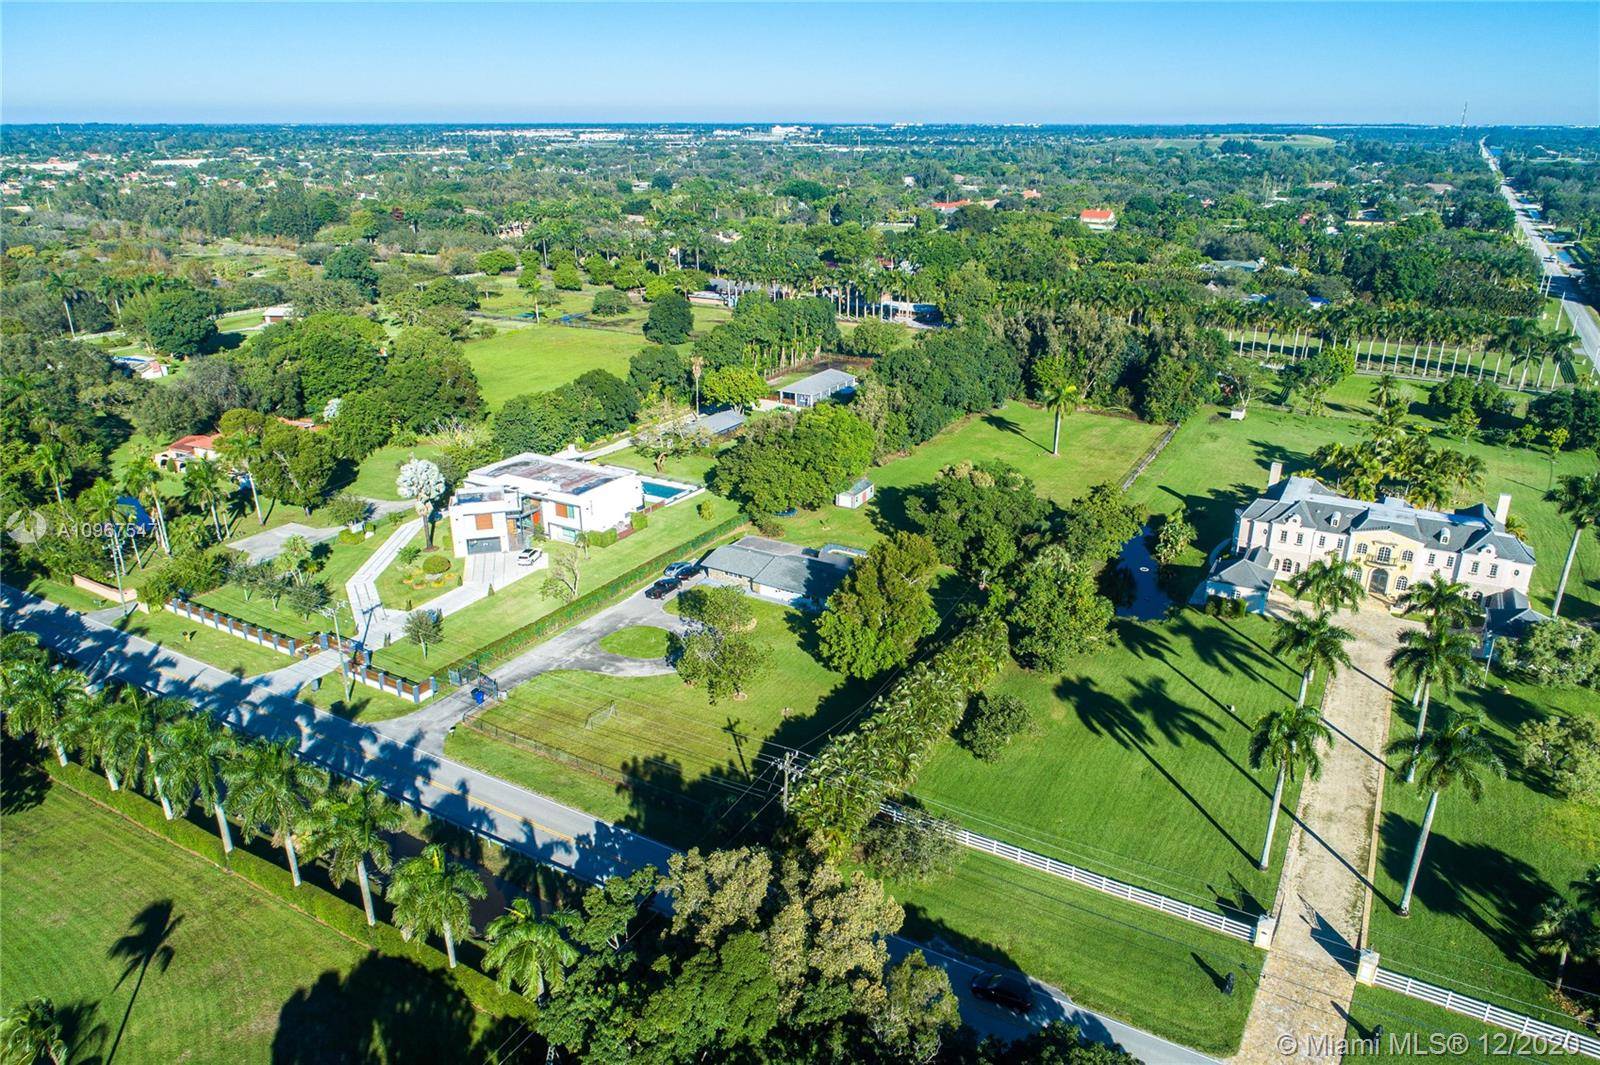 2. 3 ACRES in the prestigious Southwest Ranches ; a prime location on Stirling Road positioned between two mega mansions.